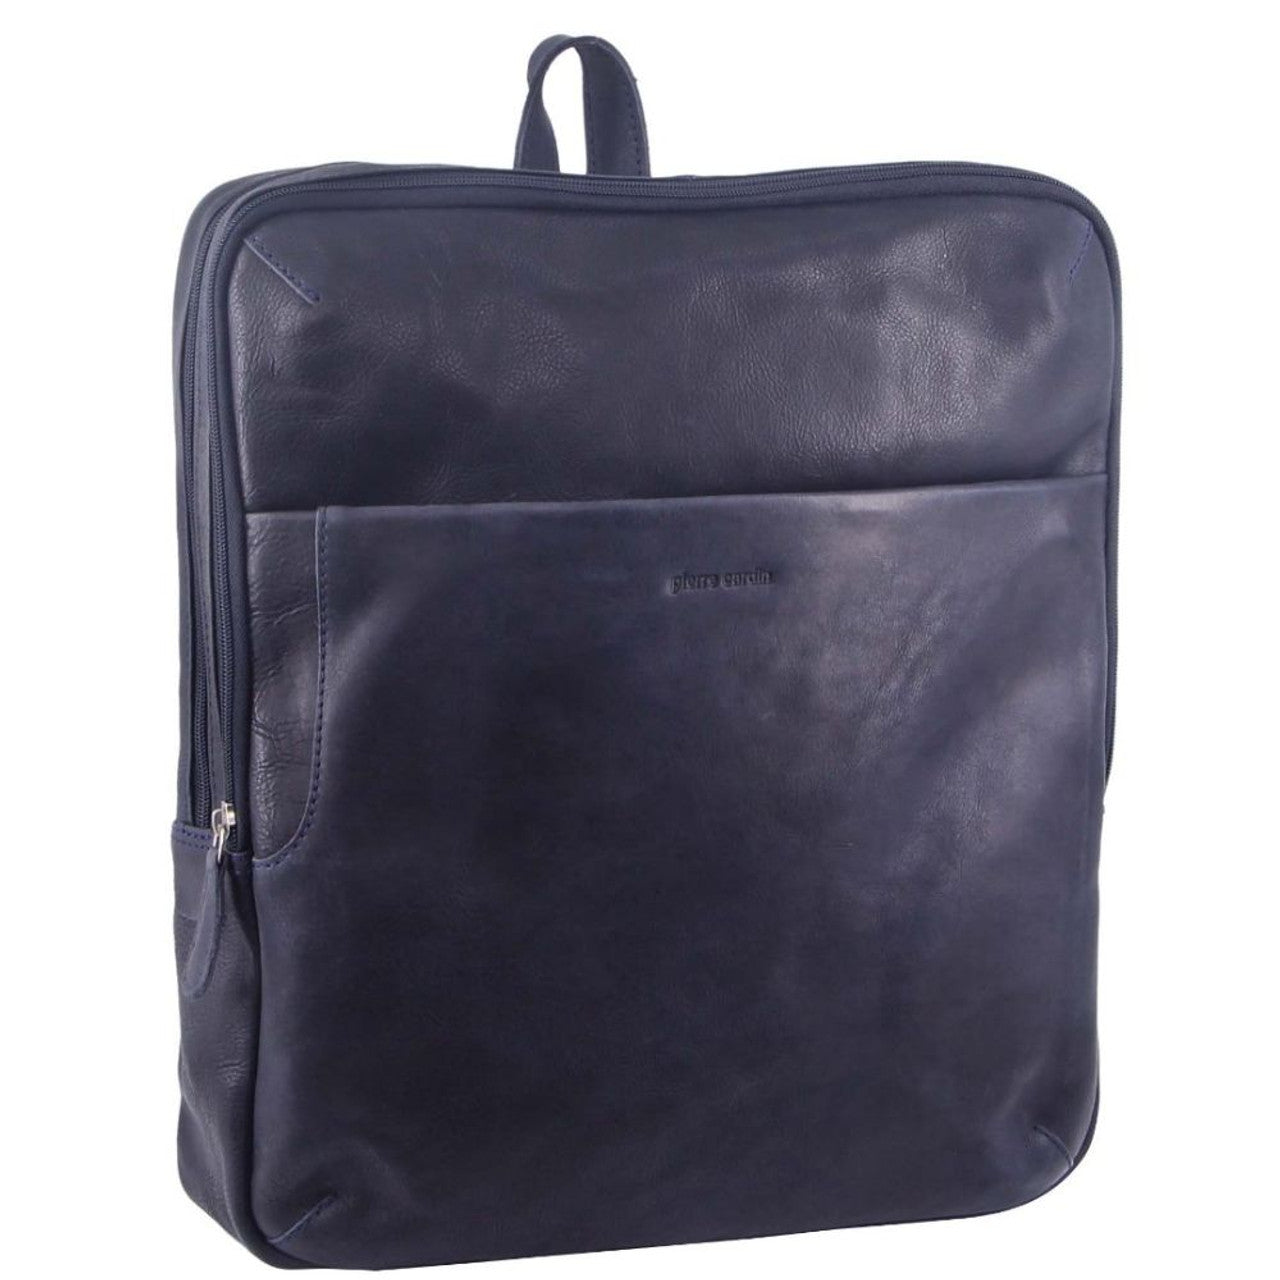 Pierre Cardin Rustic Leather Business Backpack-3